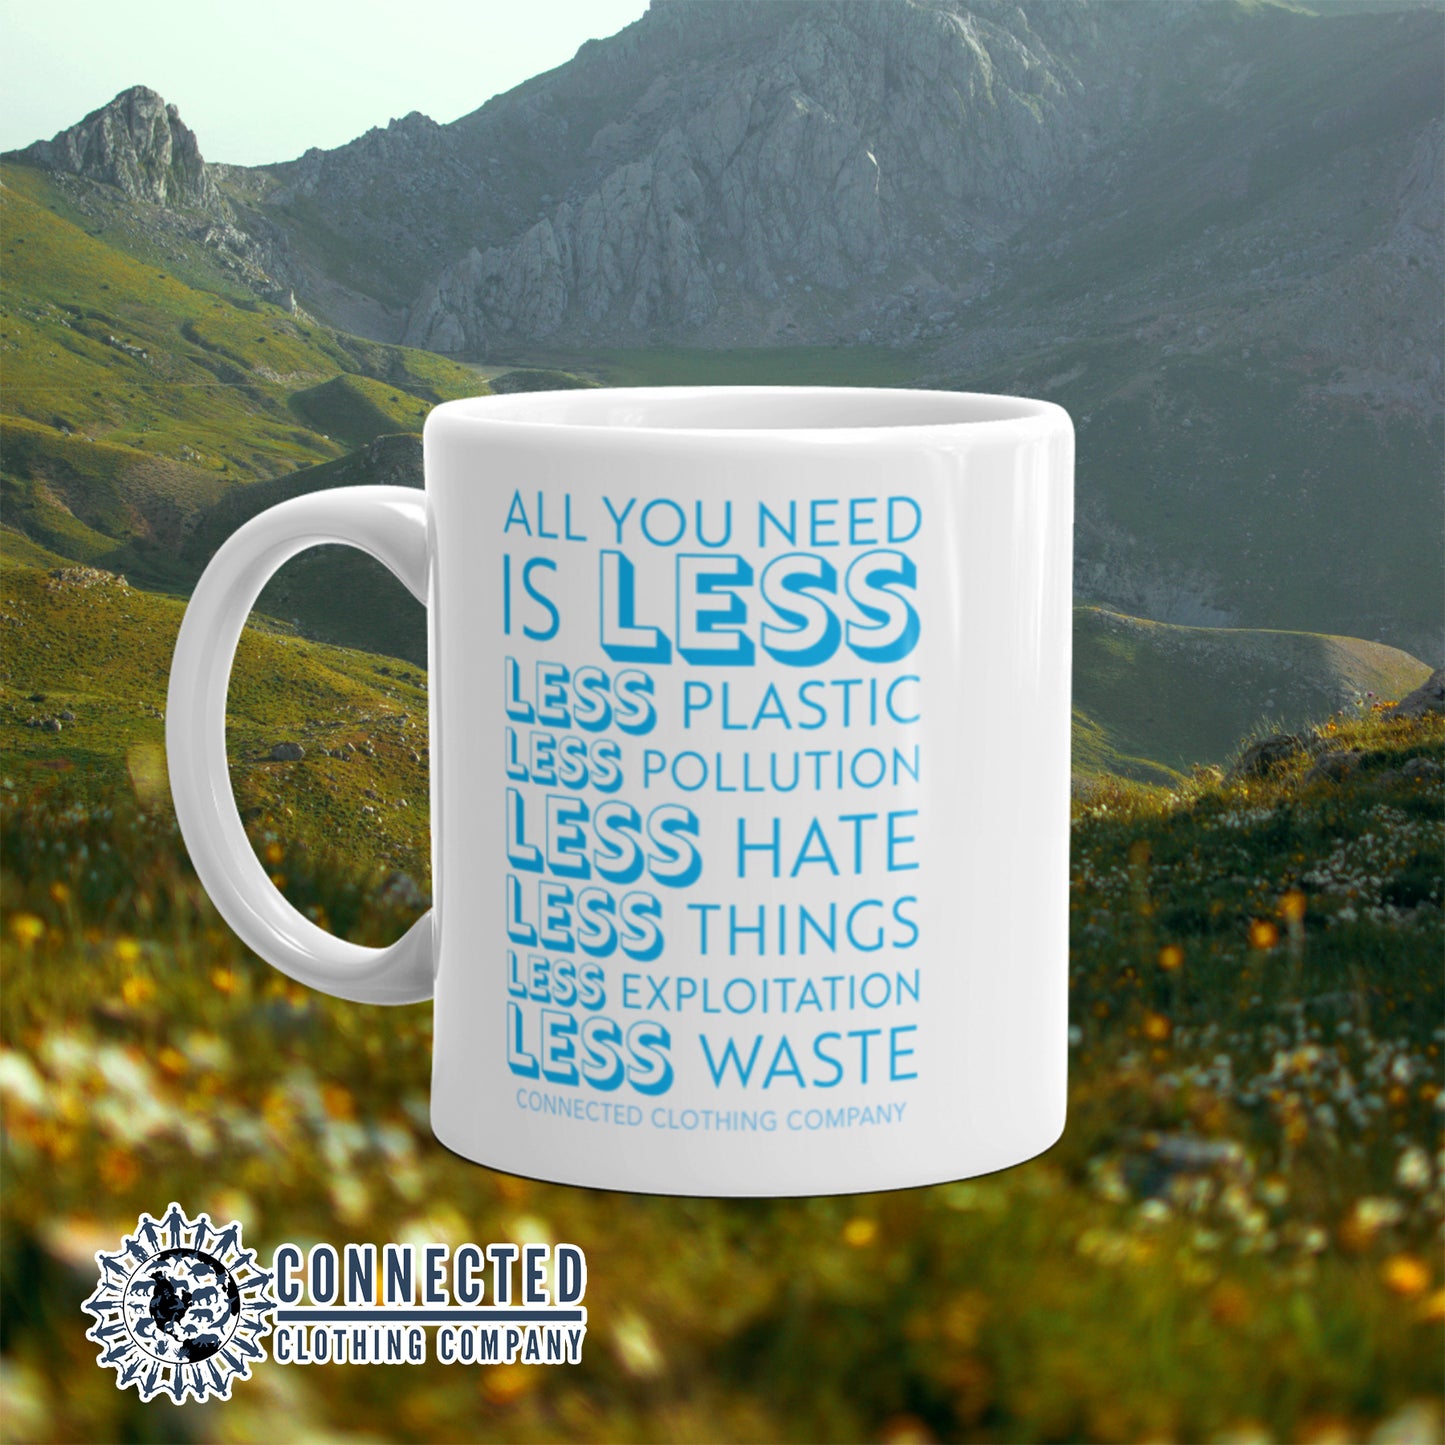 All You Need Is Less Classic Mug reads "all you need is less. less plastic. less pollution. less hate. less things. less exploitation. less waste." - Connected Clothing Company - Ethically and Sustainably Made - 10% of profits donated to Mission Blue ocean conservation